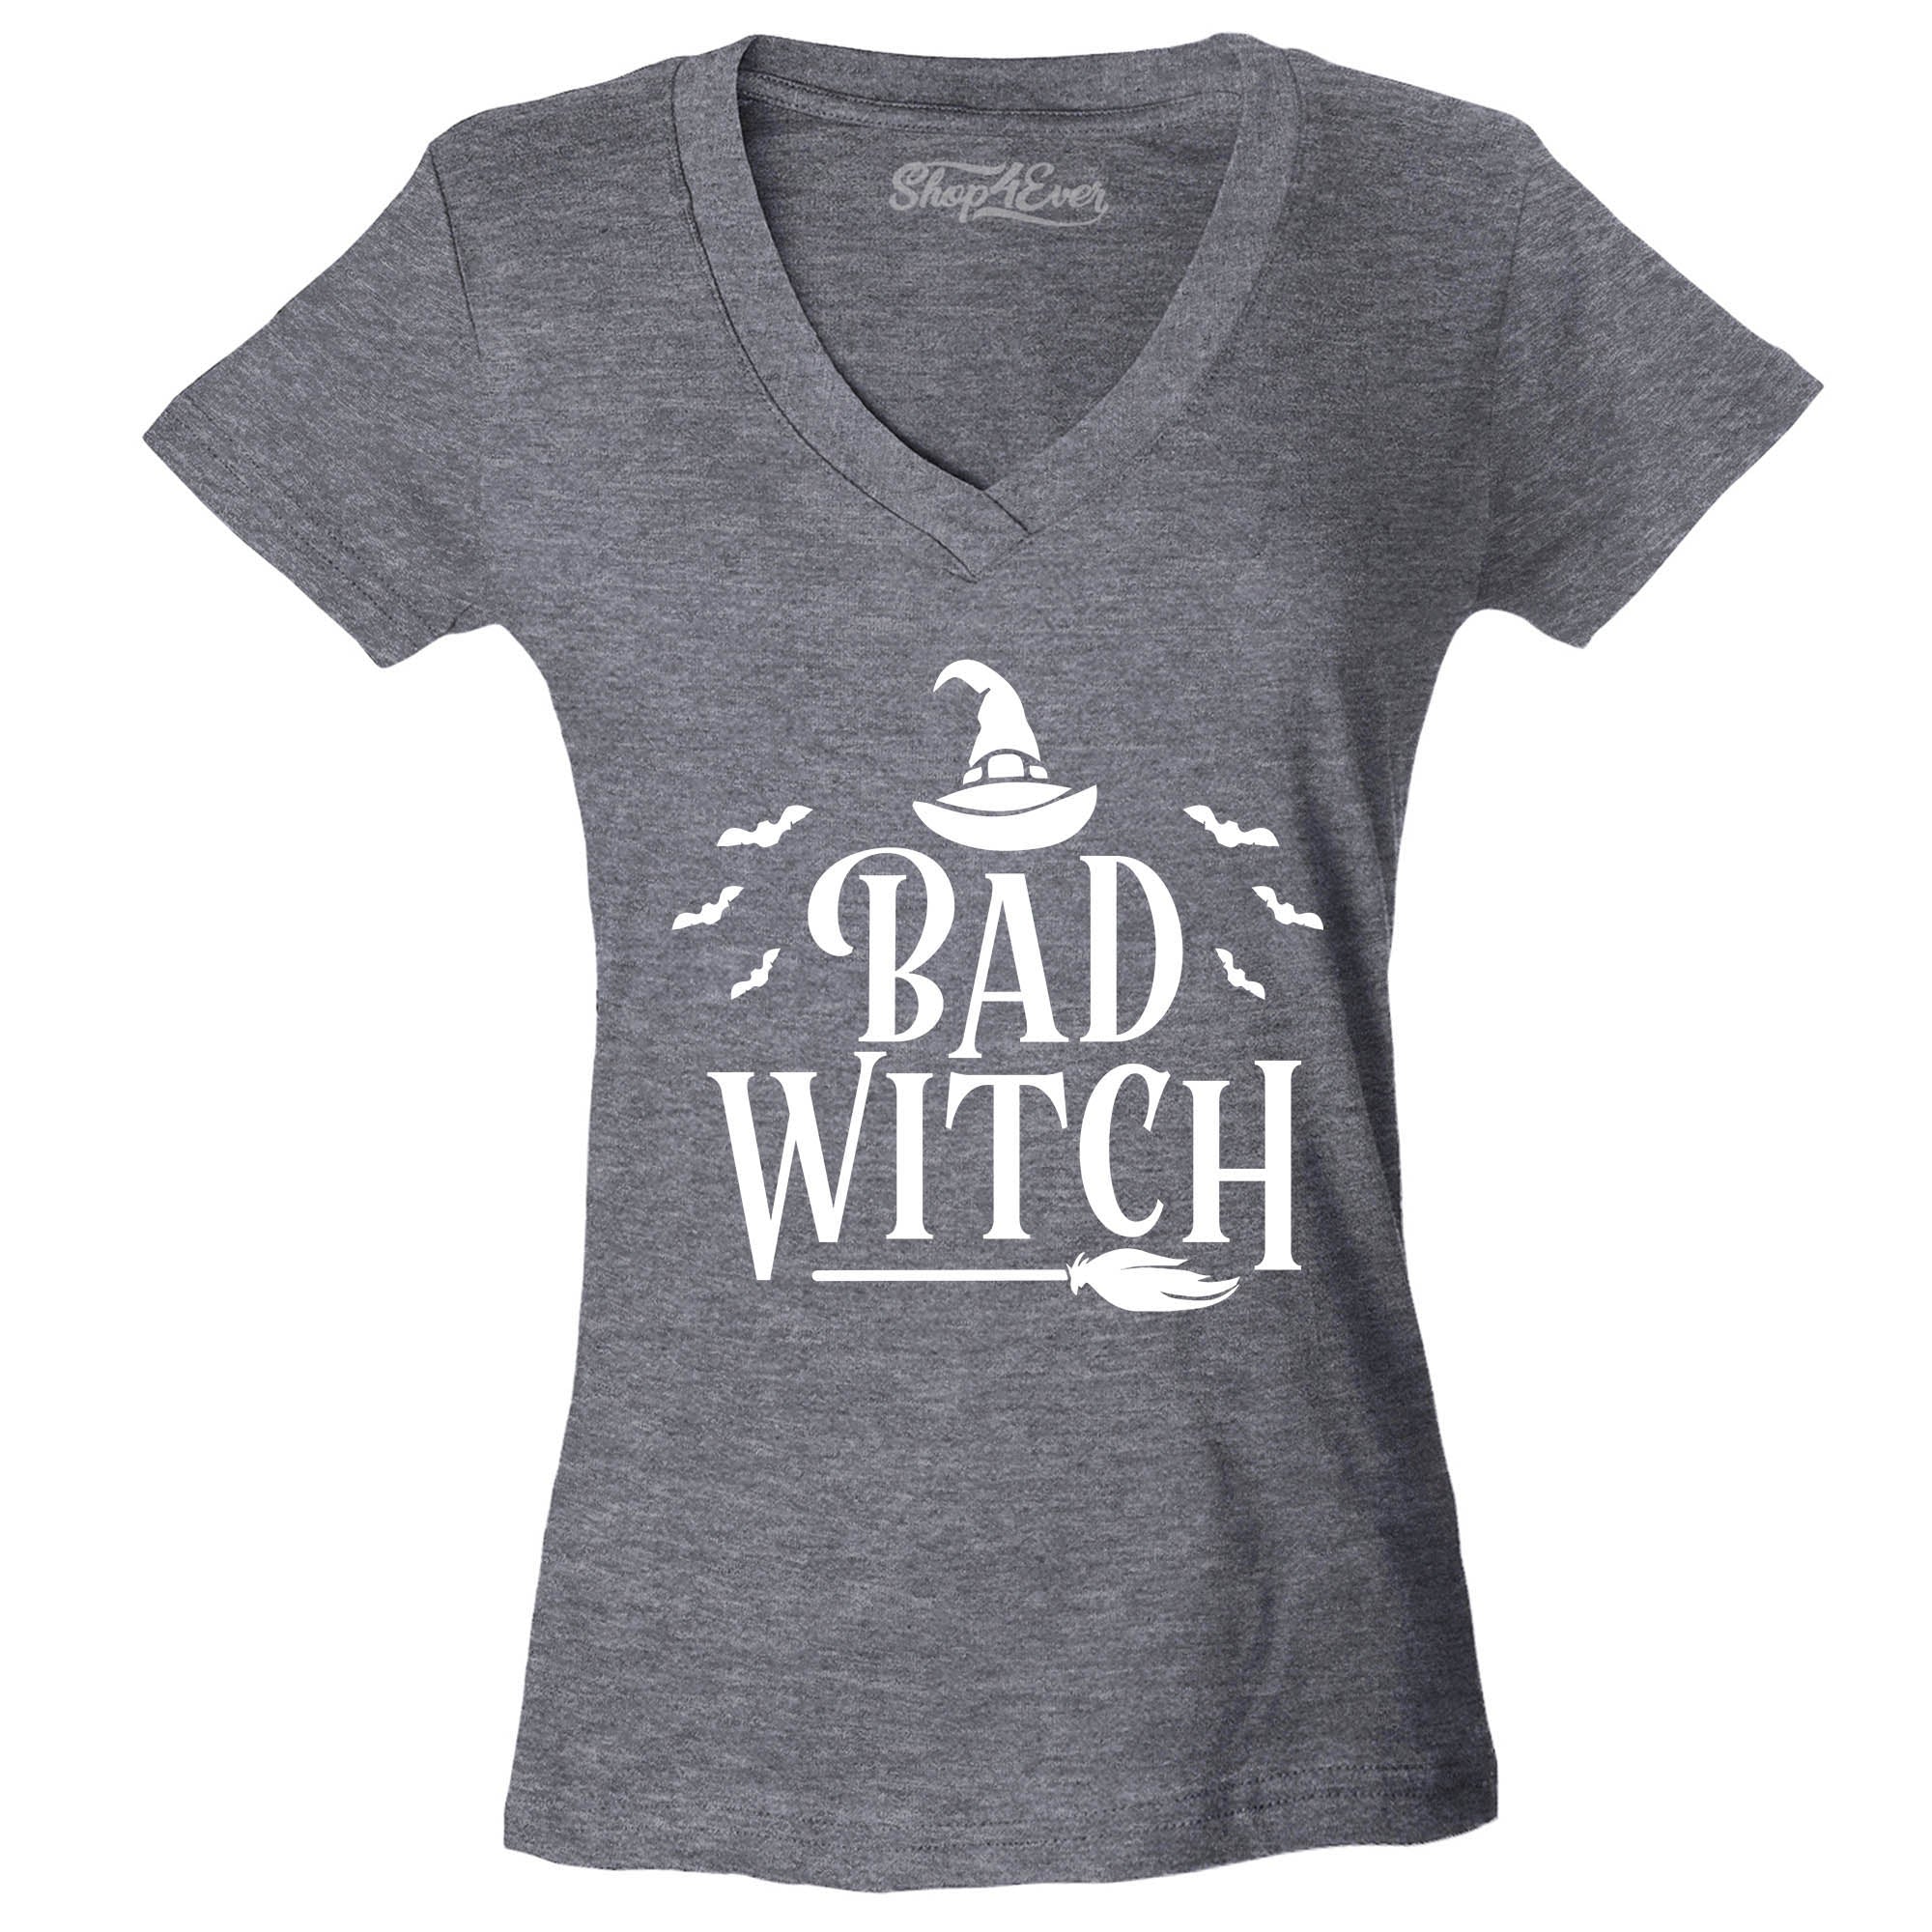 Good Witch ~ Bad Witch Matching Halloween Costume Women's V-Neck T-Shirt Slim Fit